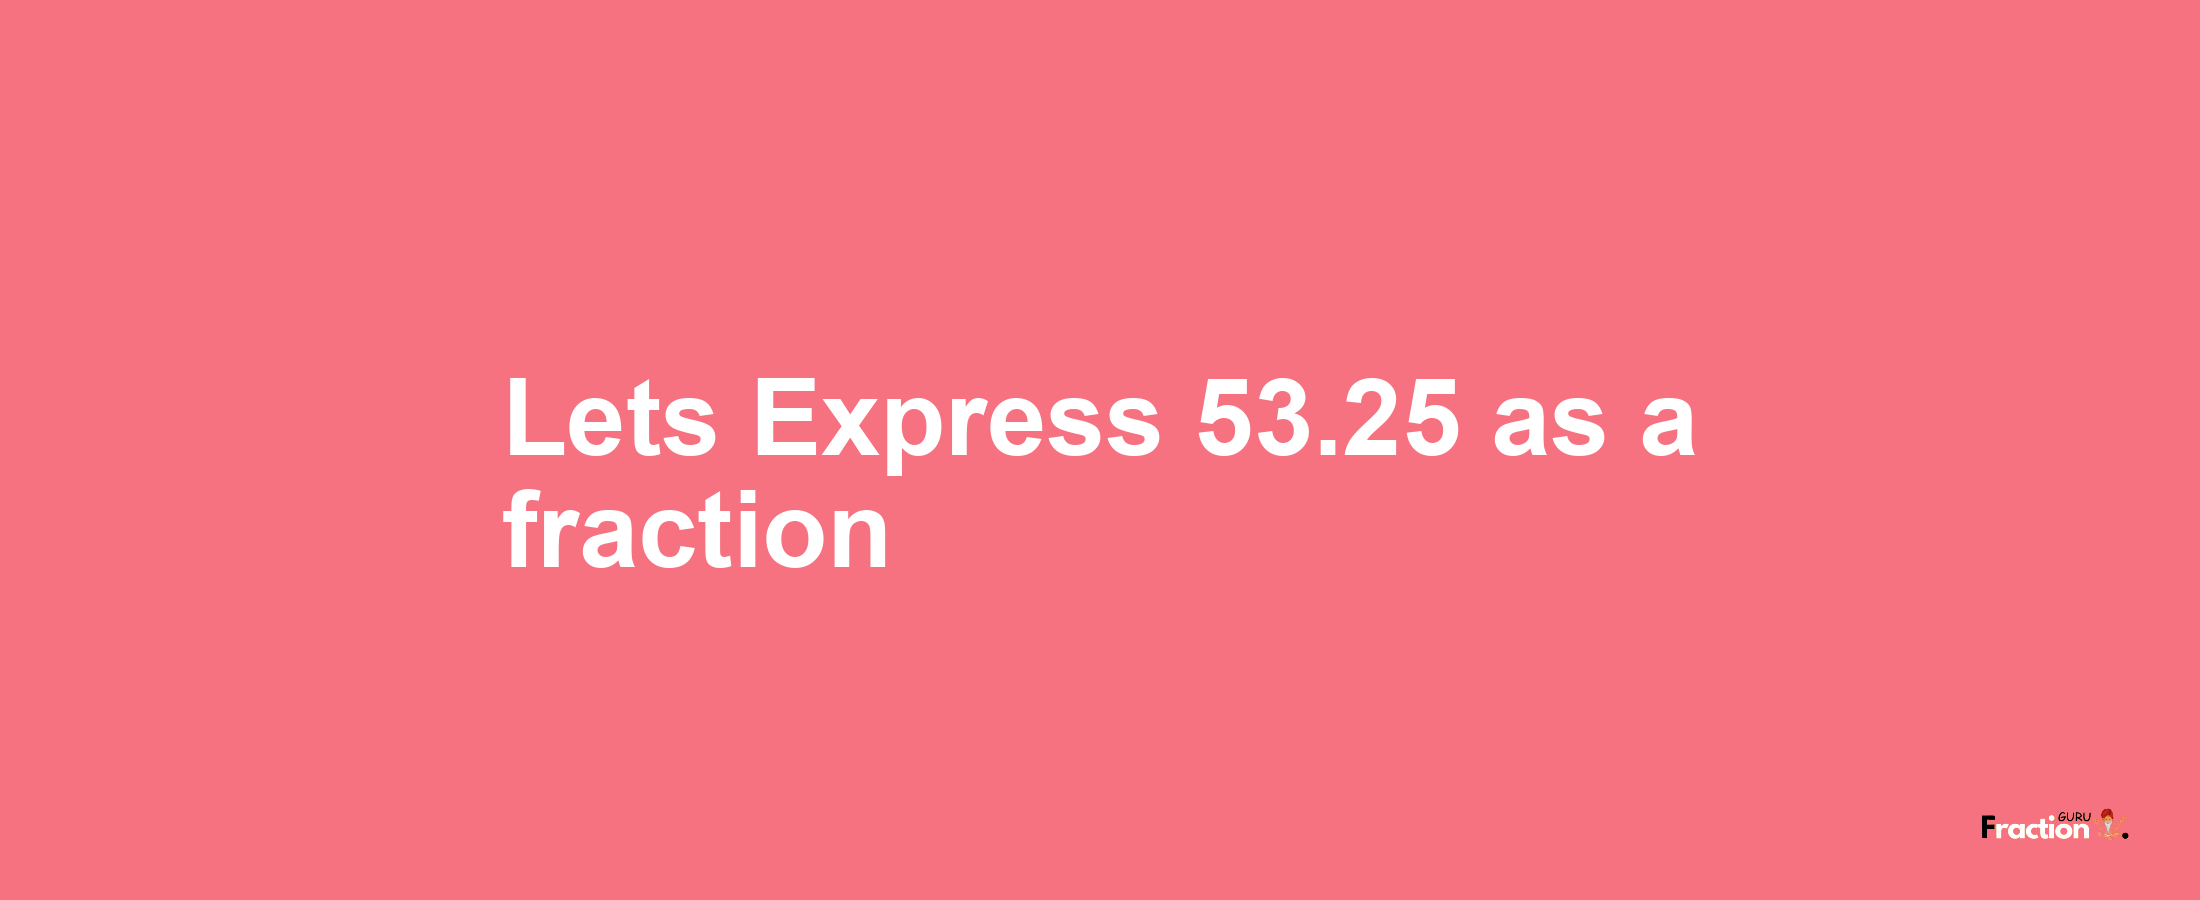 Lets Express 53.25 as afraction